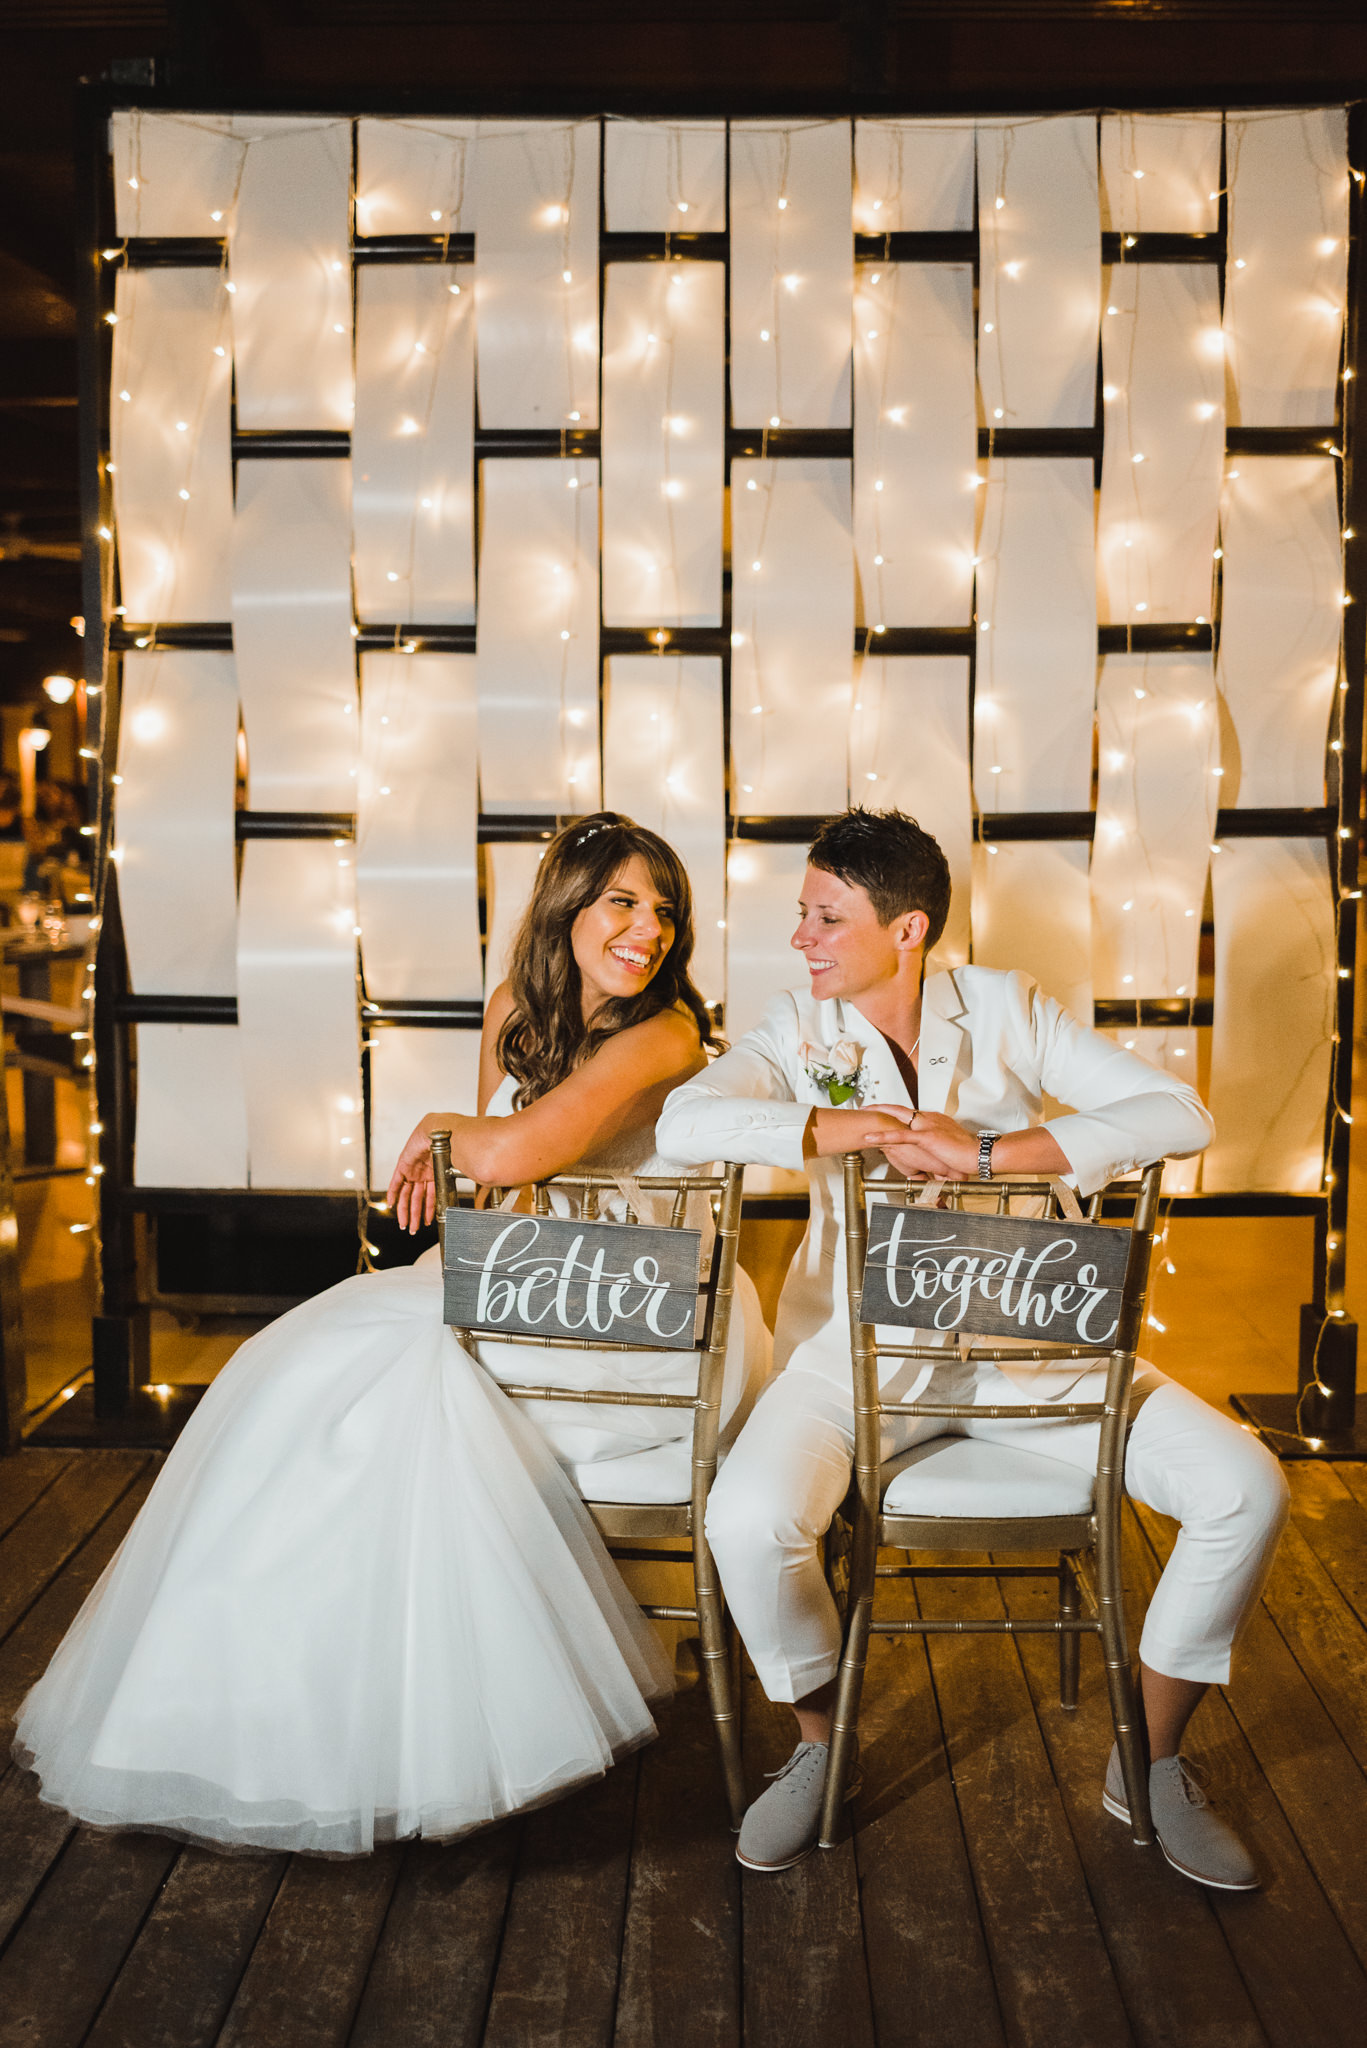 brides posing on chairs that read "better together" during wedding reception at Now Sapphire Resort in Mexico